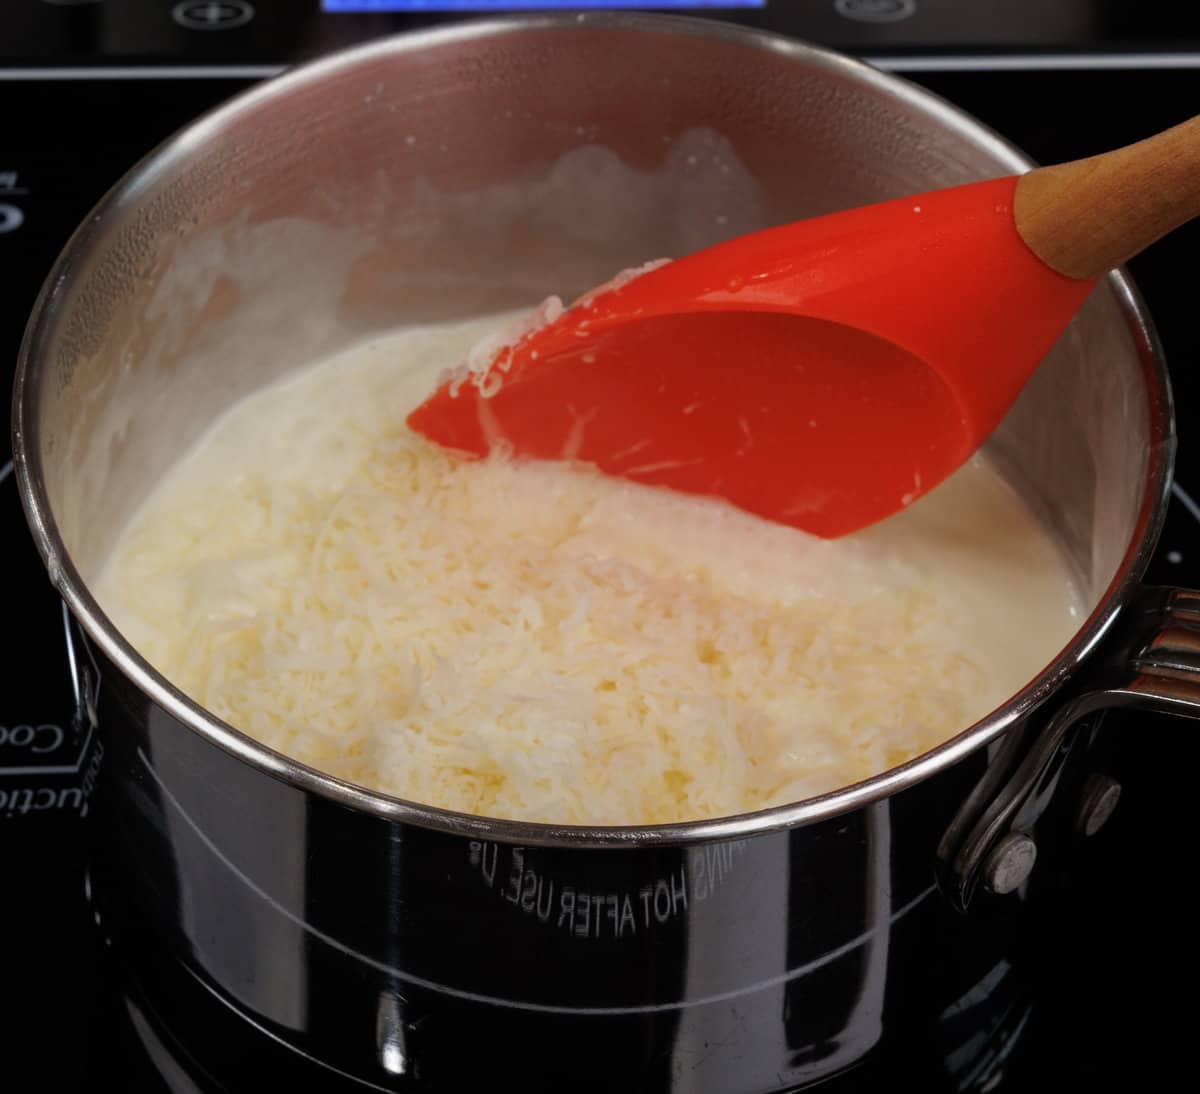 shredded parmesan cheese in a pot of heavy cream simmering on the stove.